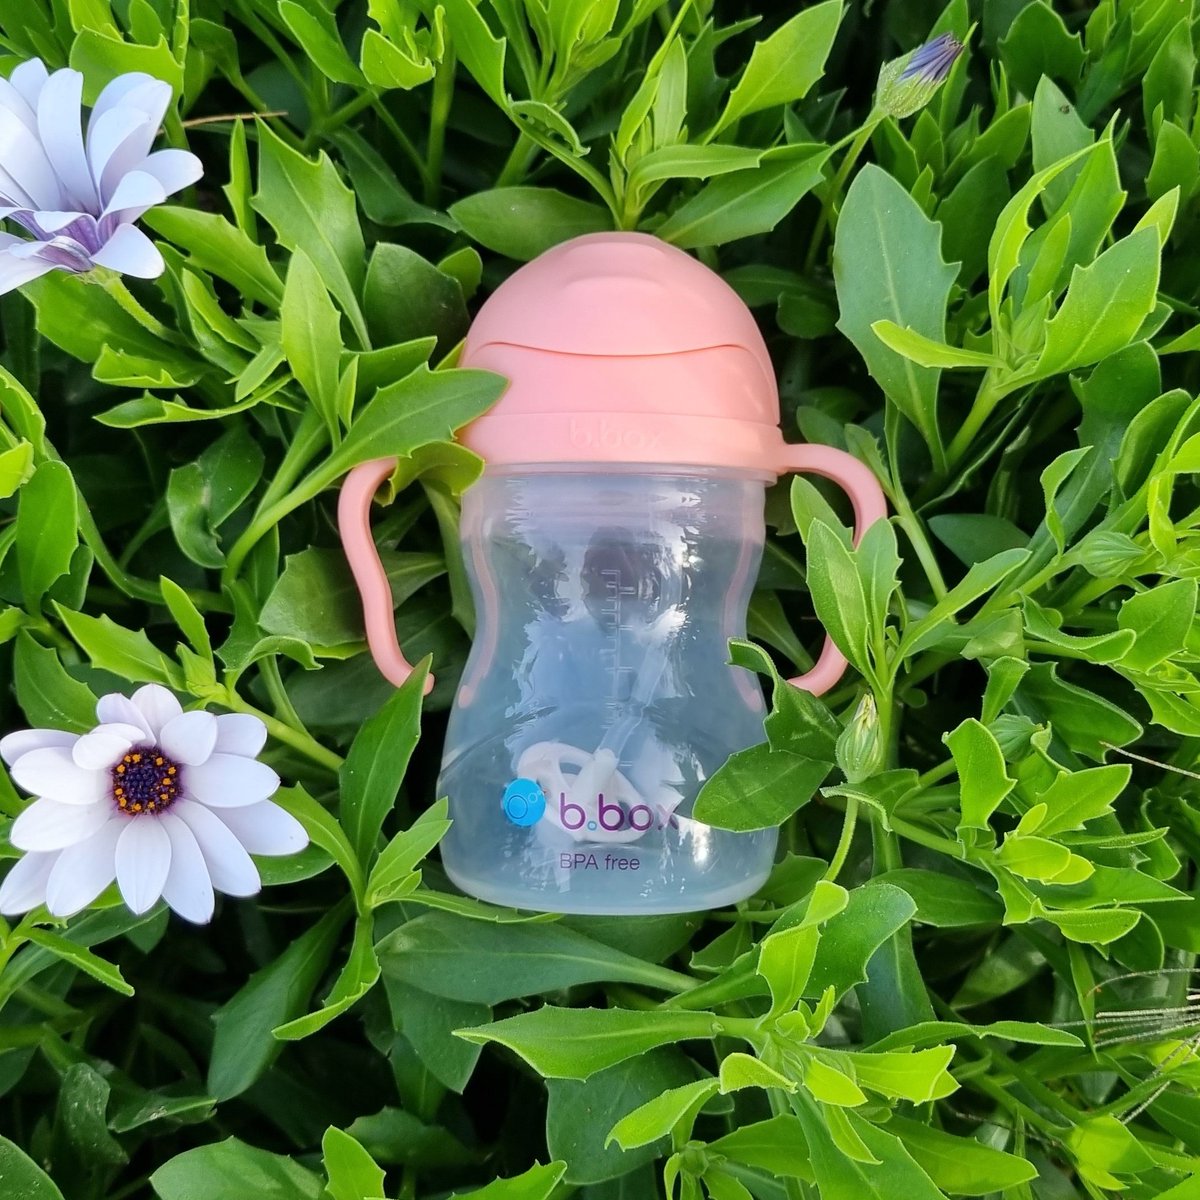 Did you know that we have the l8r.it/Tpr6 award-winning Sippy Cup available in TWENTY different colours?

So you can find the perfect match for your little one!

👉️ Shop the full range over at l8r.it/10QT

#shopmoodles #bboxuk #sippycup #toddler #baby